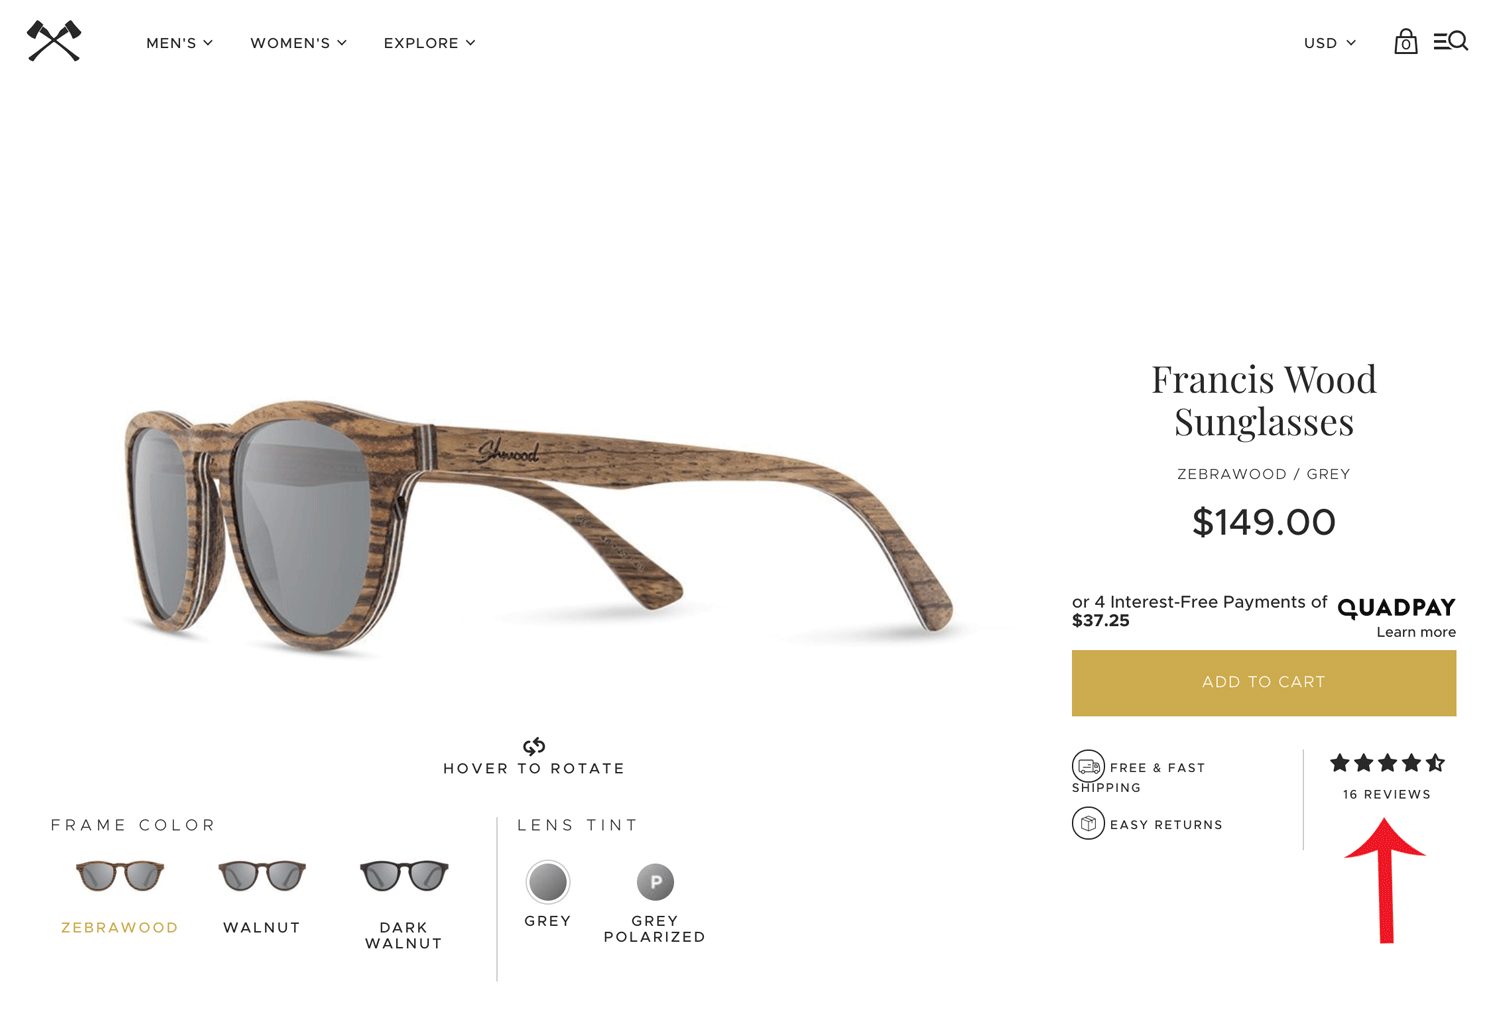 Screenshot showing a product page for sunglasses